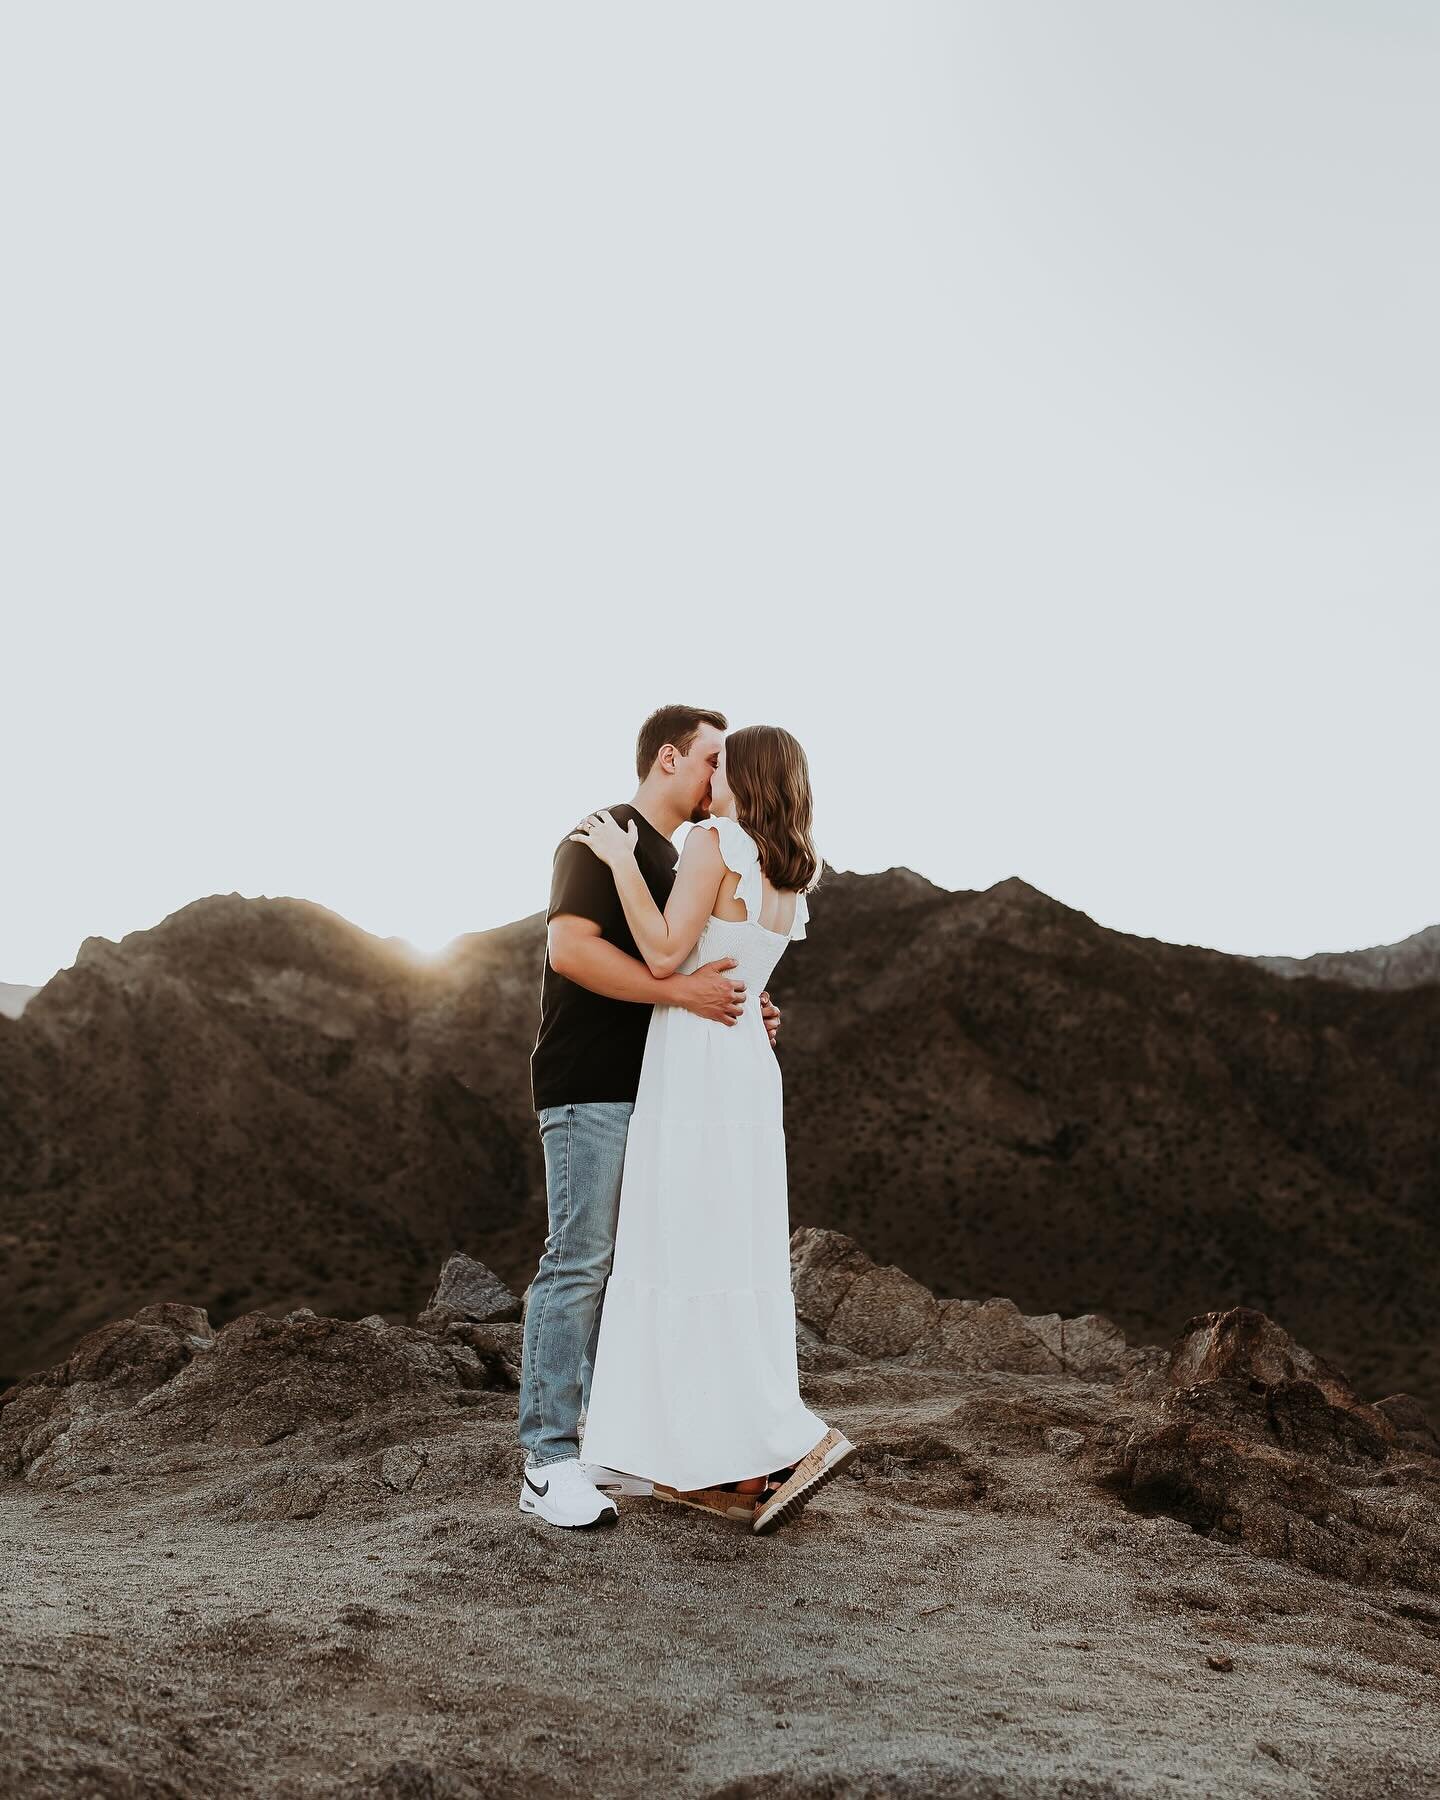 Engagement session in Palm Springs ❤️✨